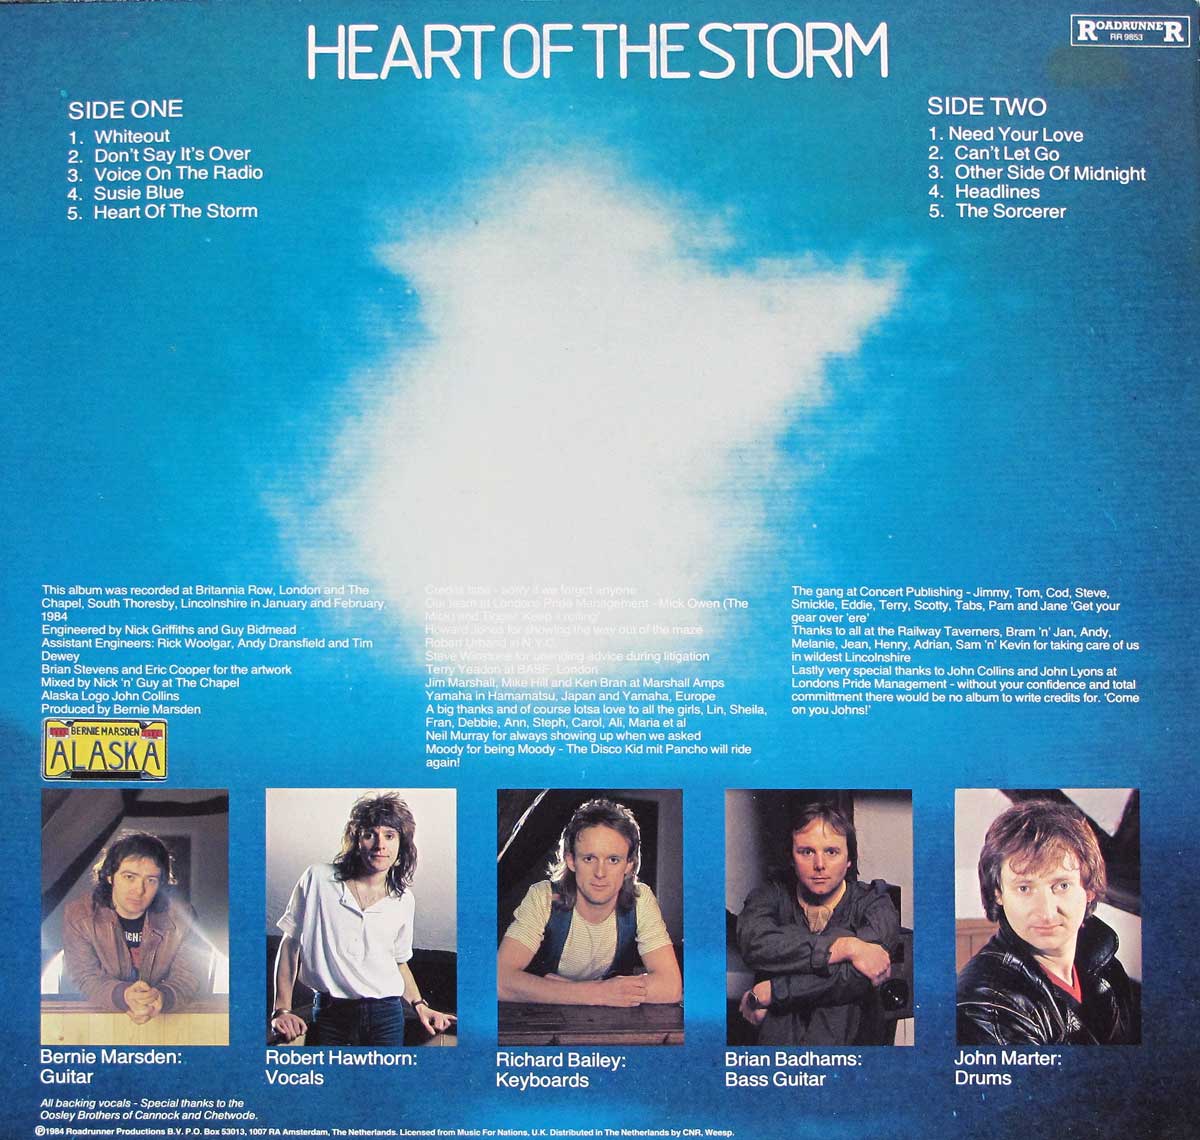 High Resolution Photo Album Back Cover of Heart of the Storm https://vinyl-records.nl